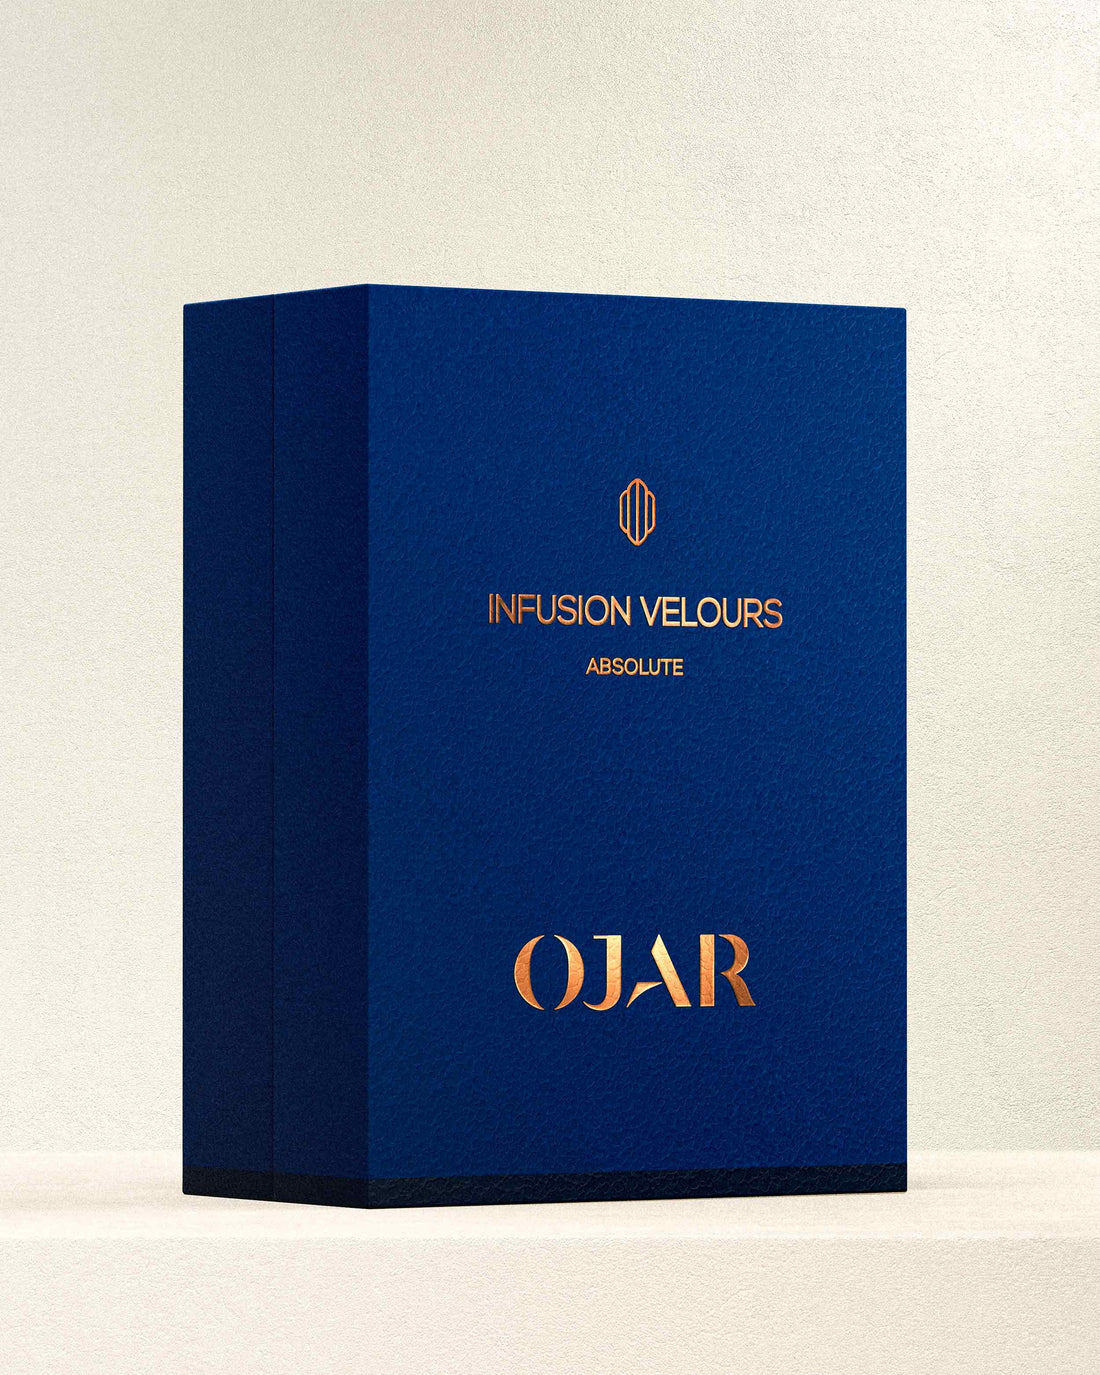 OJAR - ABSOLUTE: INFUSION VELOURS